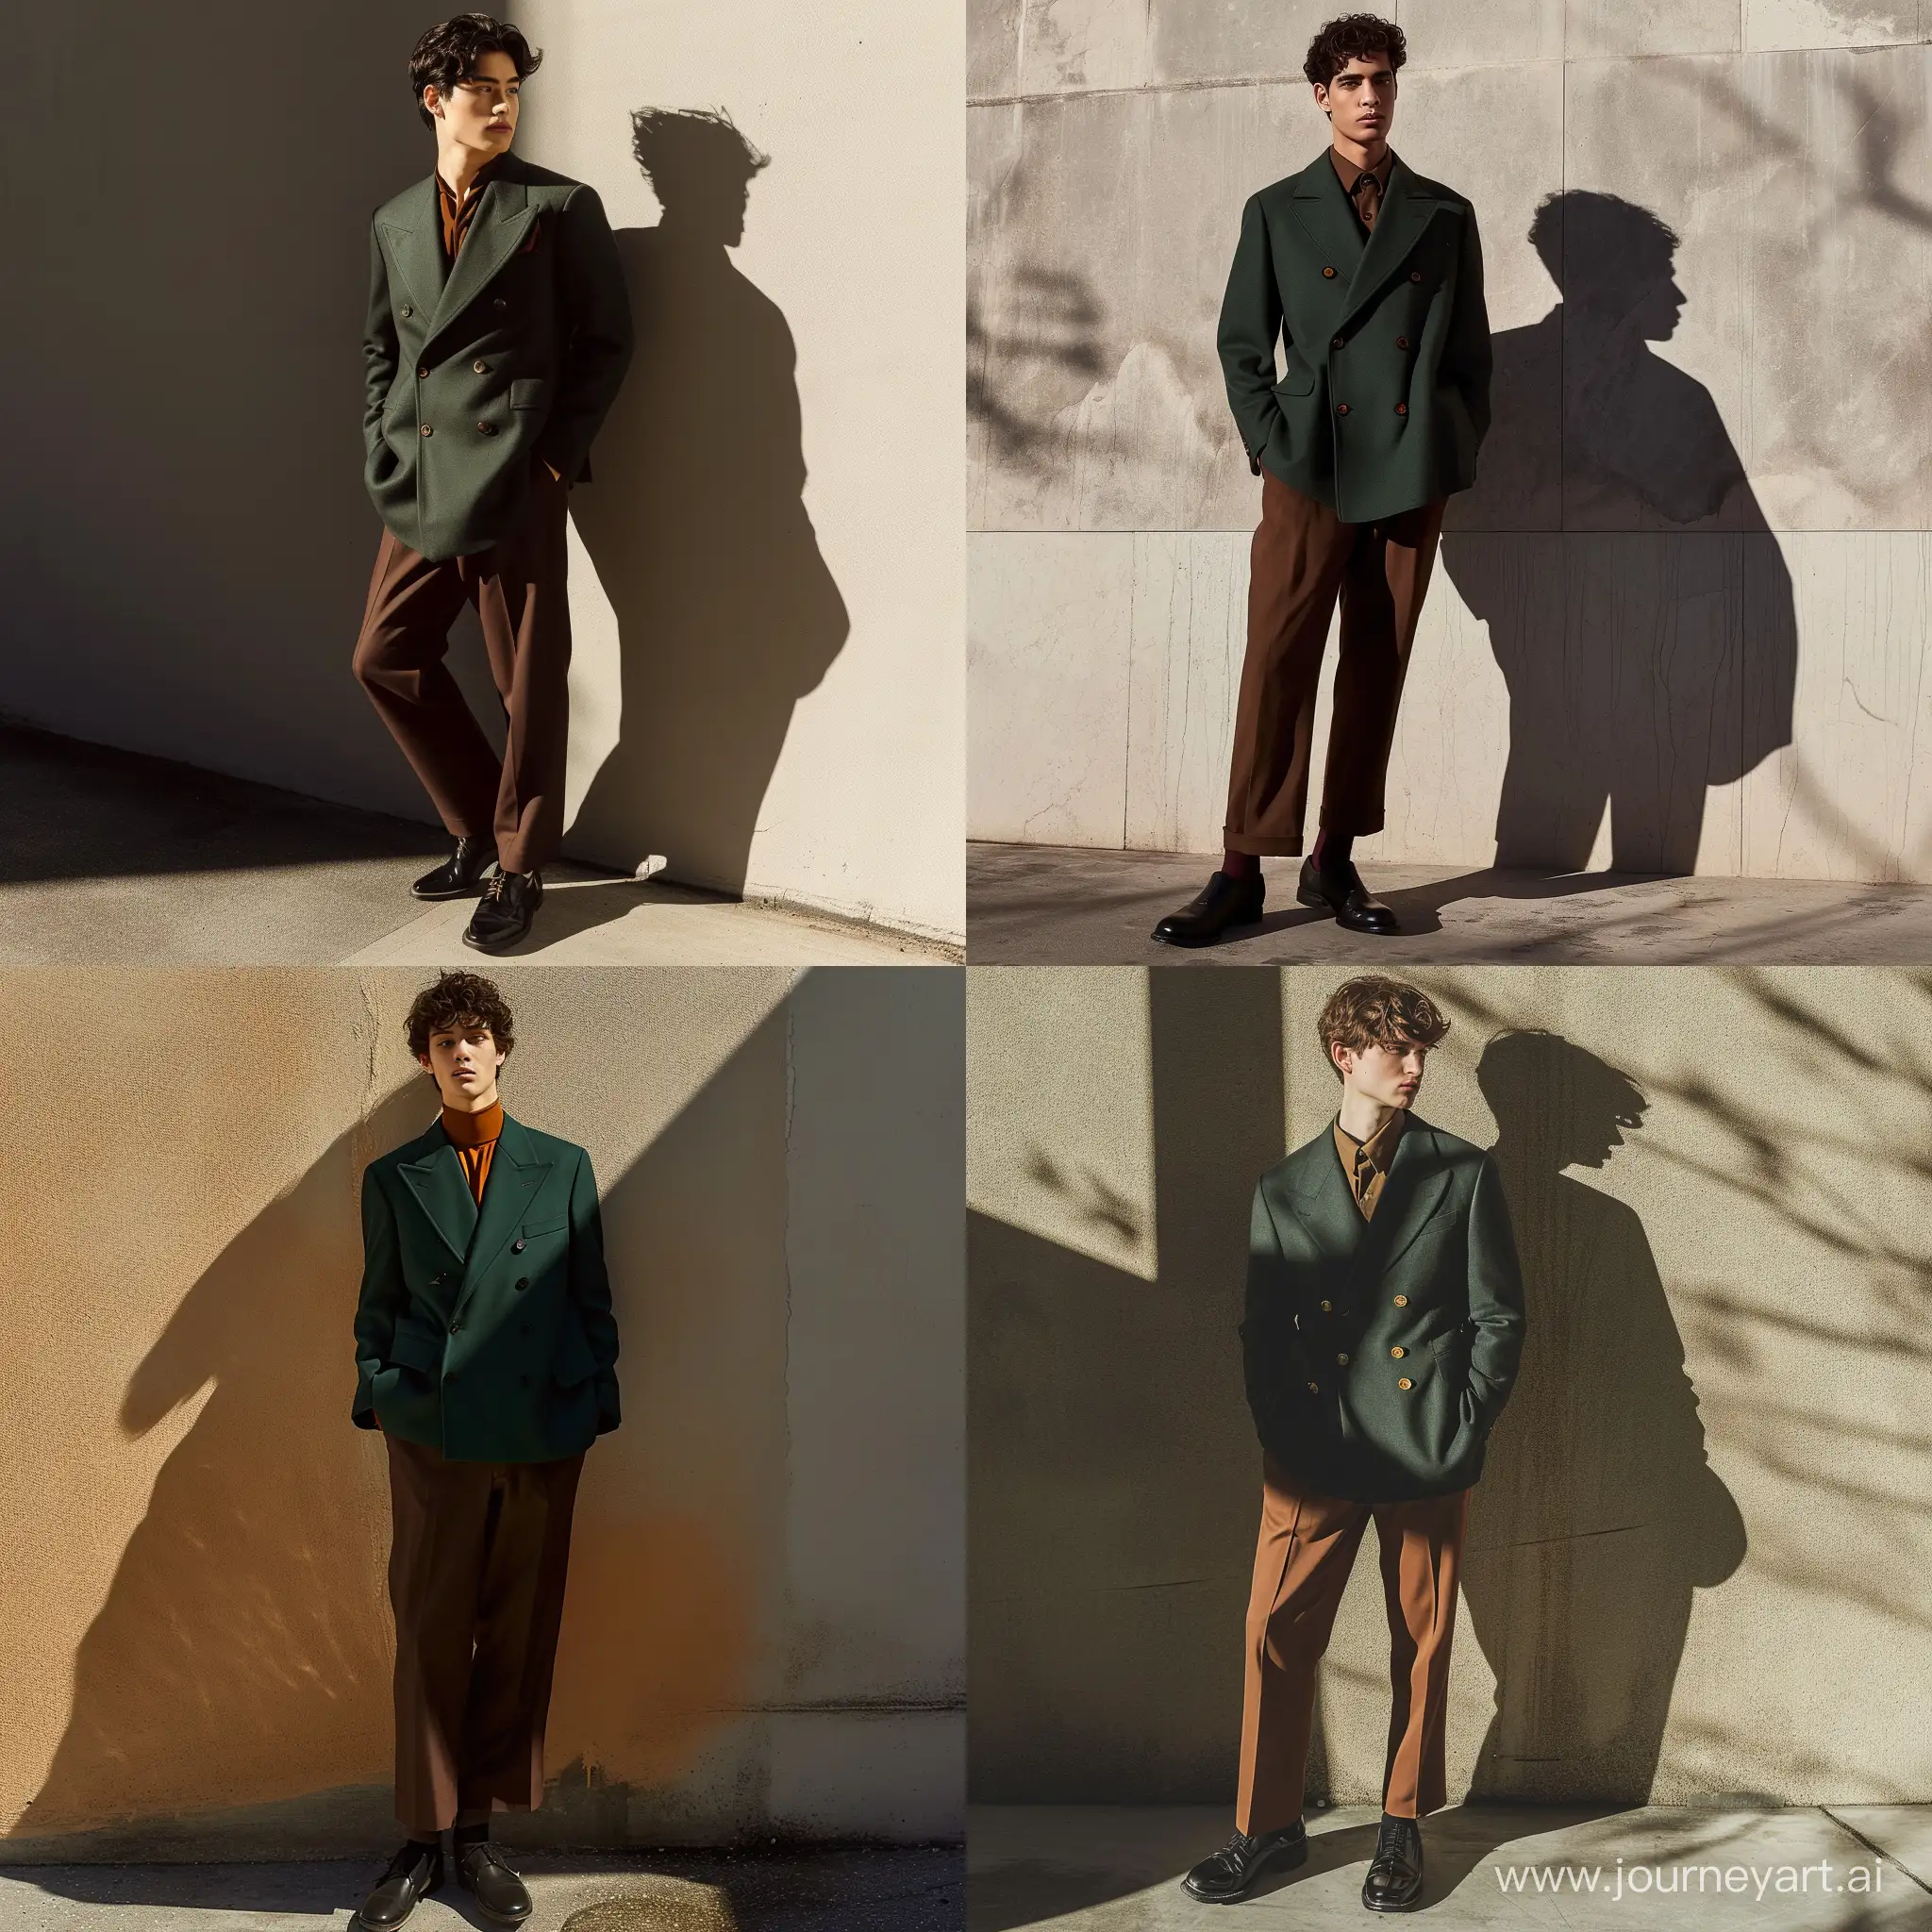 a man, standing against a wall where their shadow is cast, wearing a dark green double-breasted jacket, brown trousers, and black shoes, The image has a formal and artistic vibe